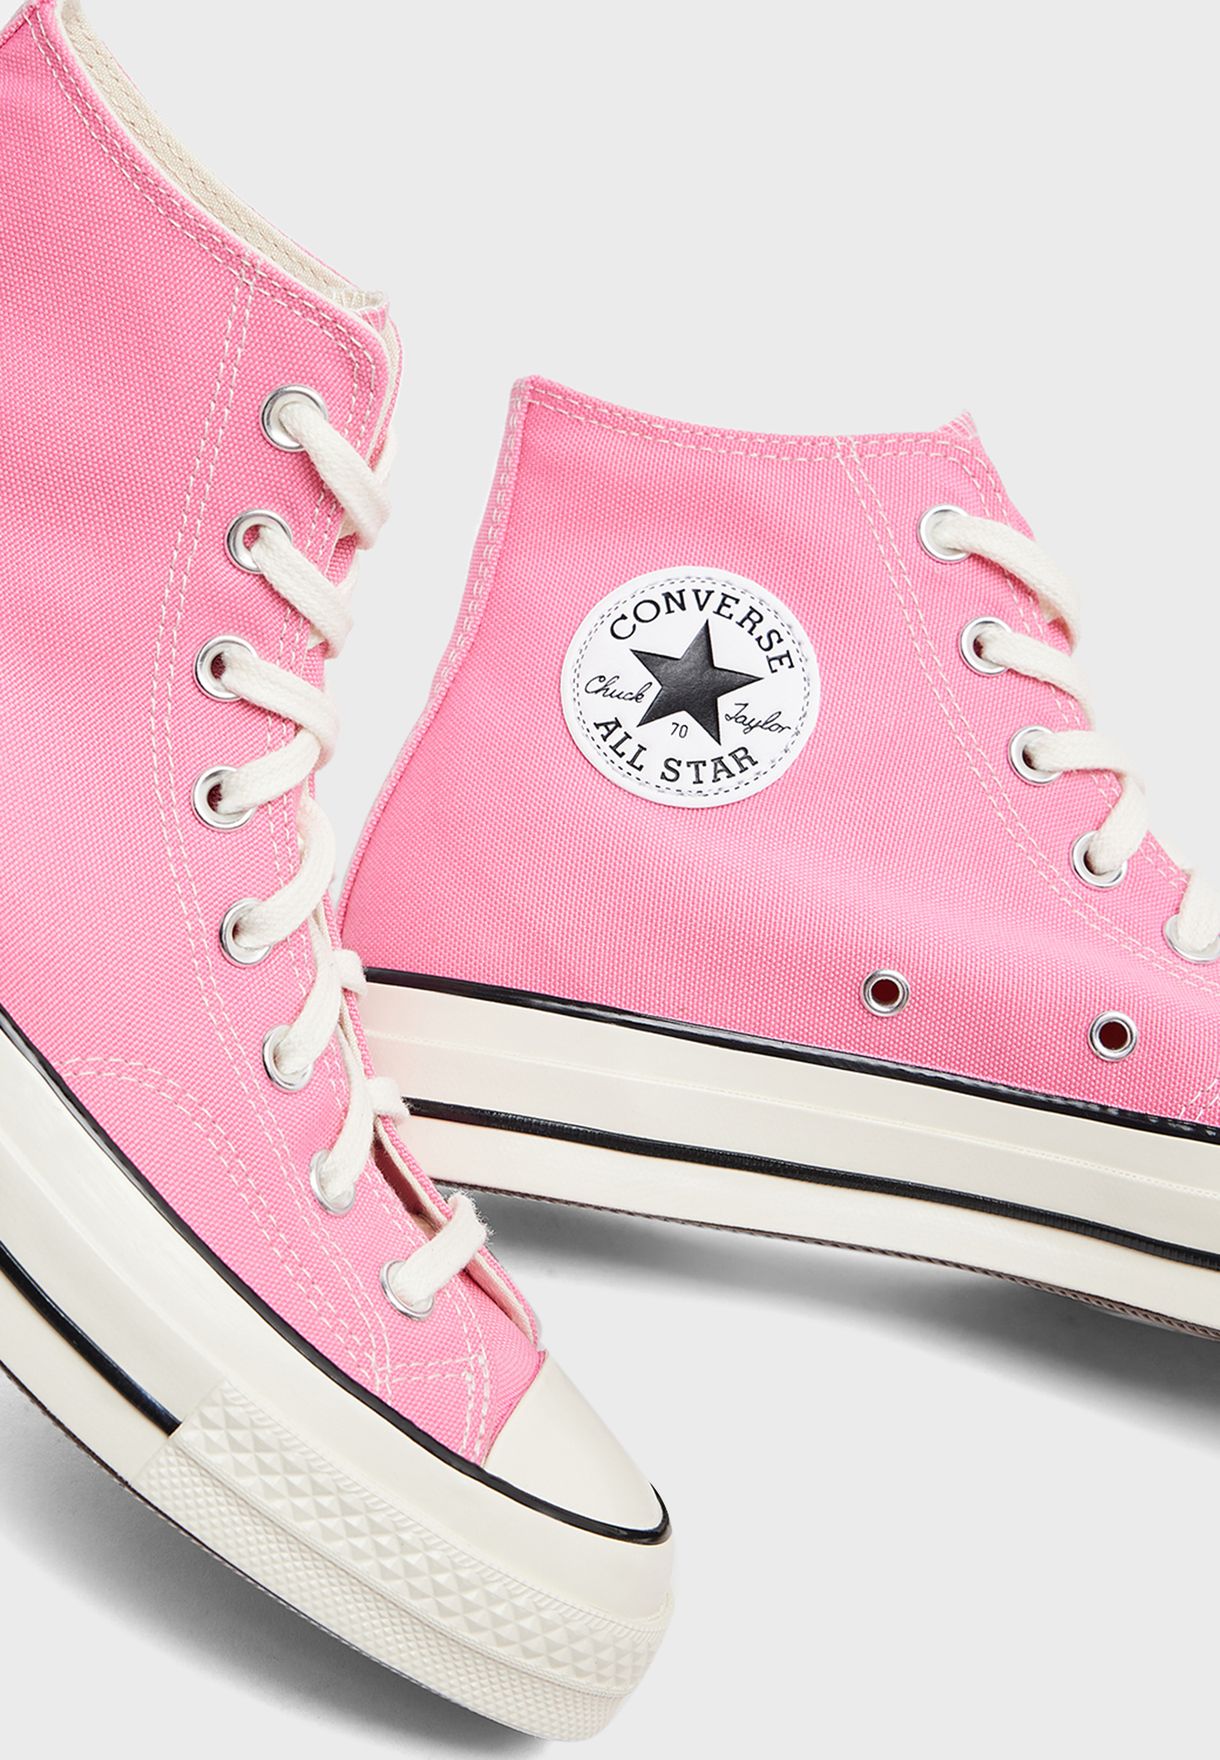 Unisex Chuck Taylor All Star 70 Sneakers